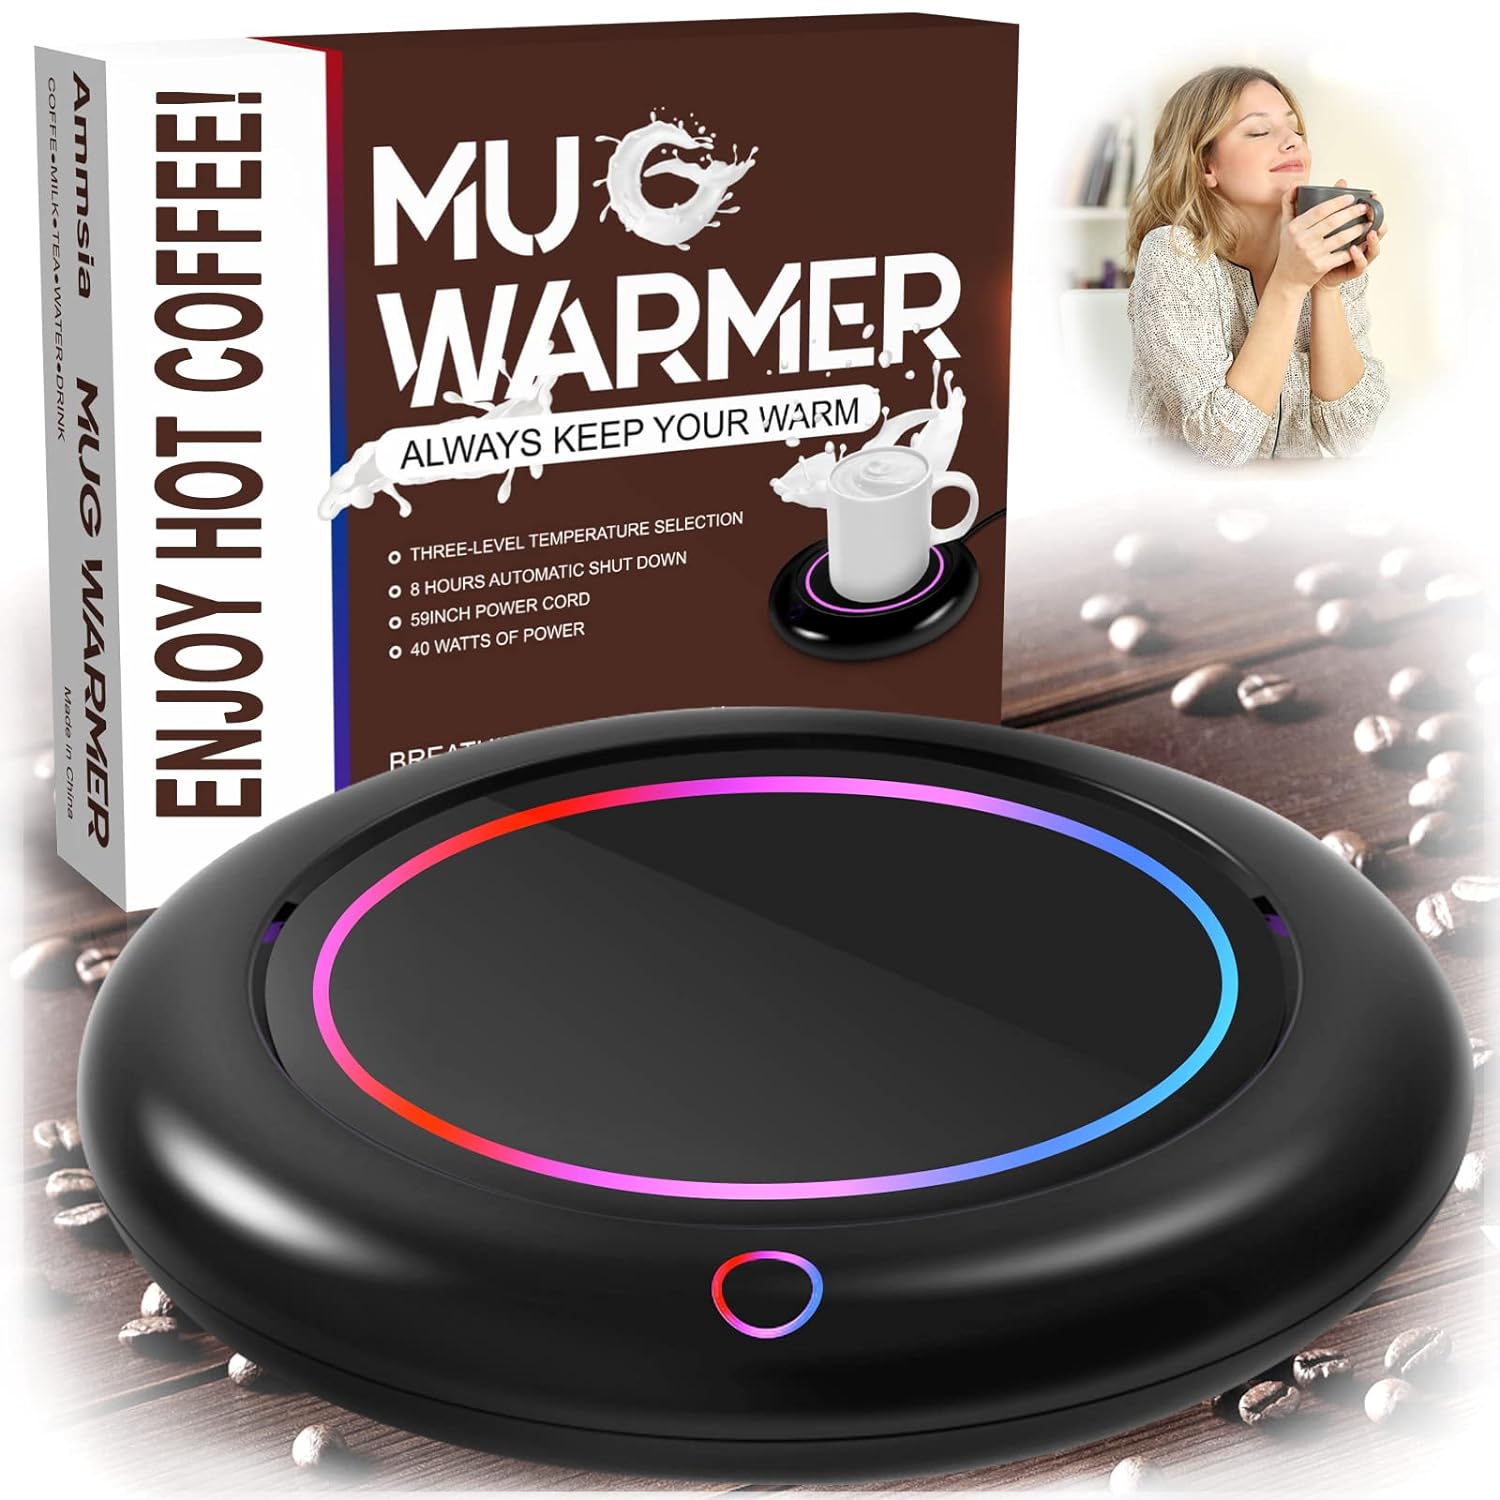 Candle Warmer, Coffee Warmer for Desk Auto Shut Off with 3 Temp Settings (149℉/131℉/113℉), Mug Warmer Compatible with Almost All Cups & Jar Candles, Cup Warmer Coffee Heater for Coffee, Milk and Tea